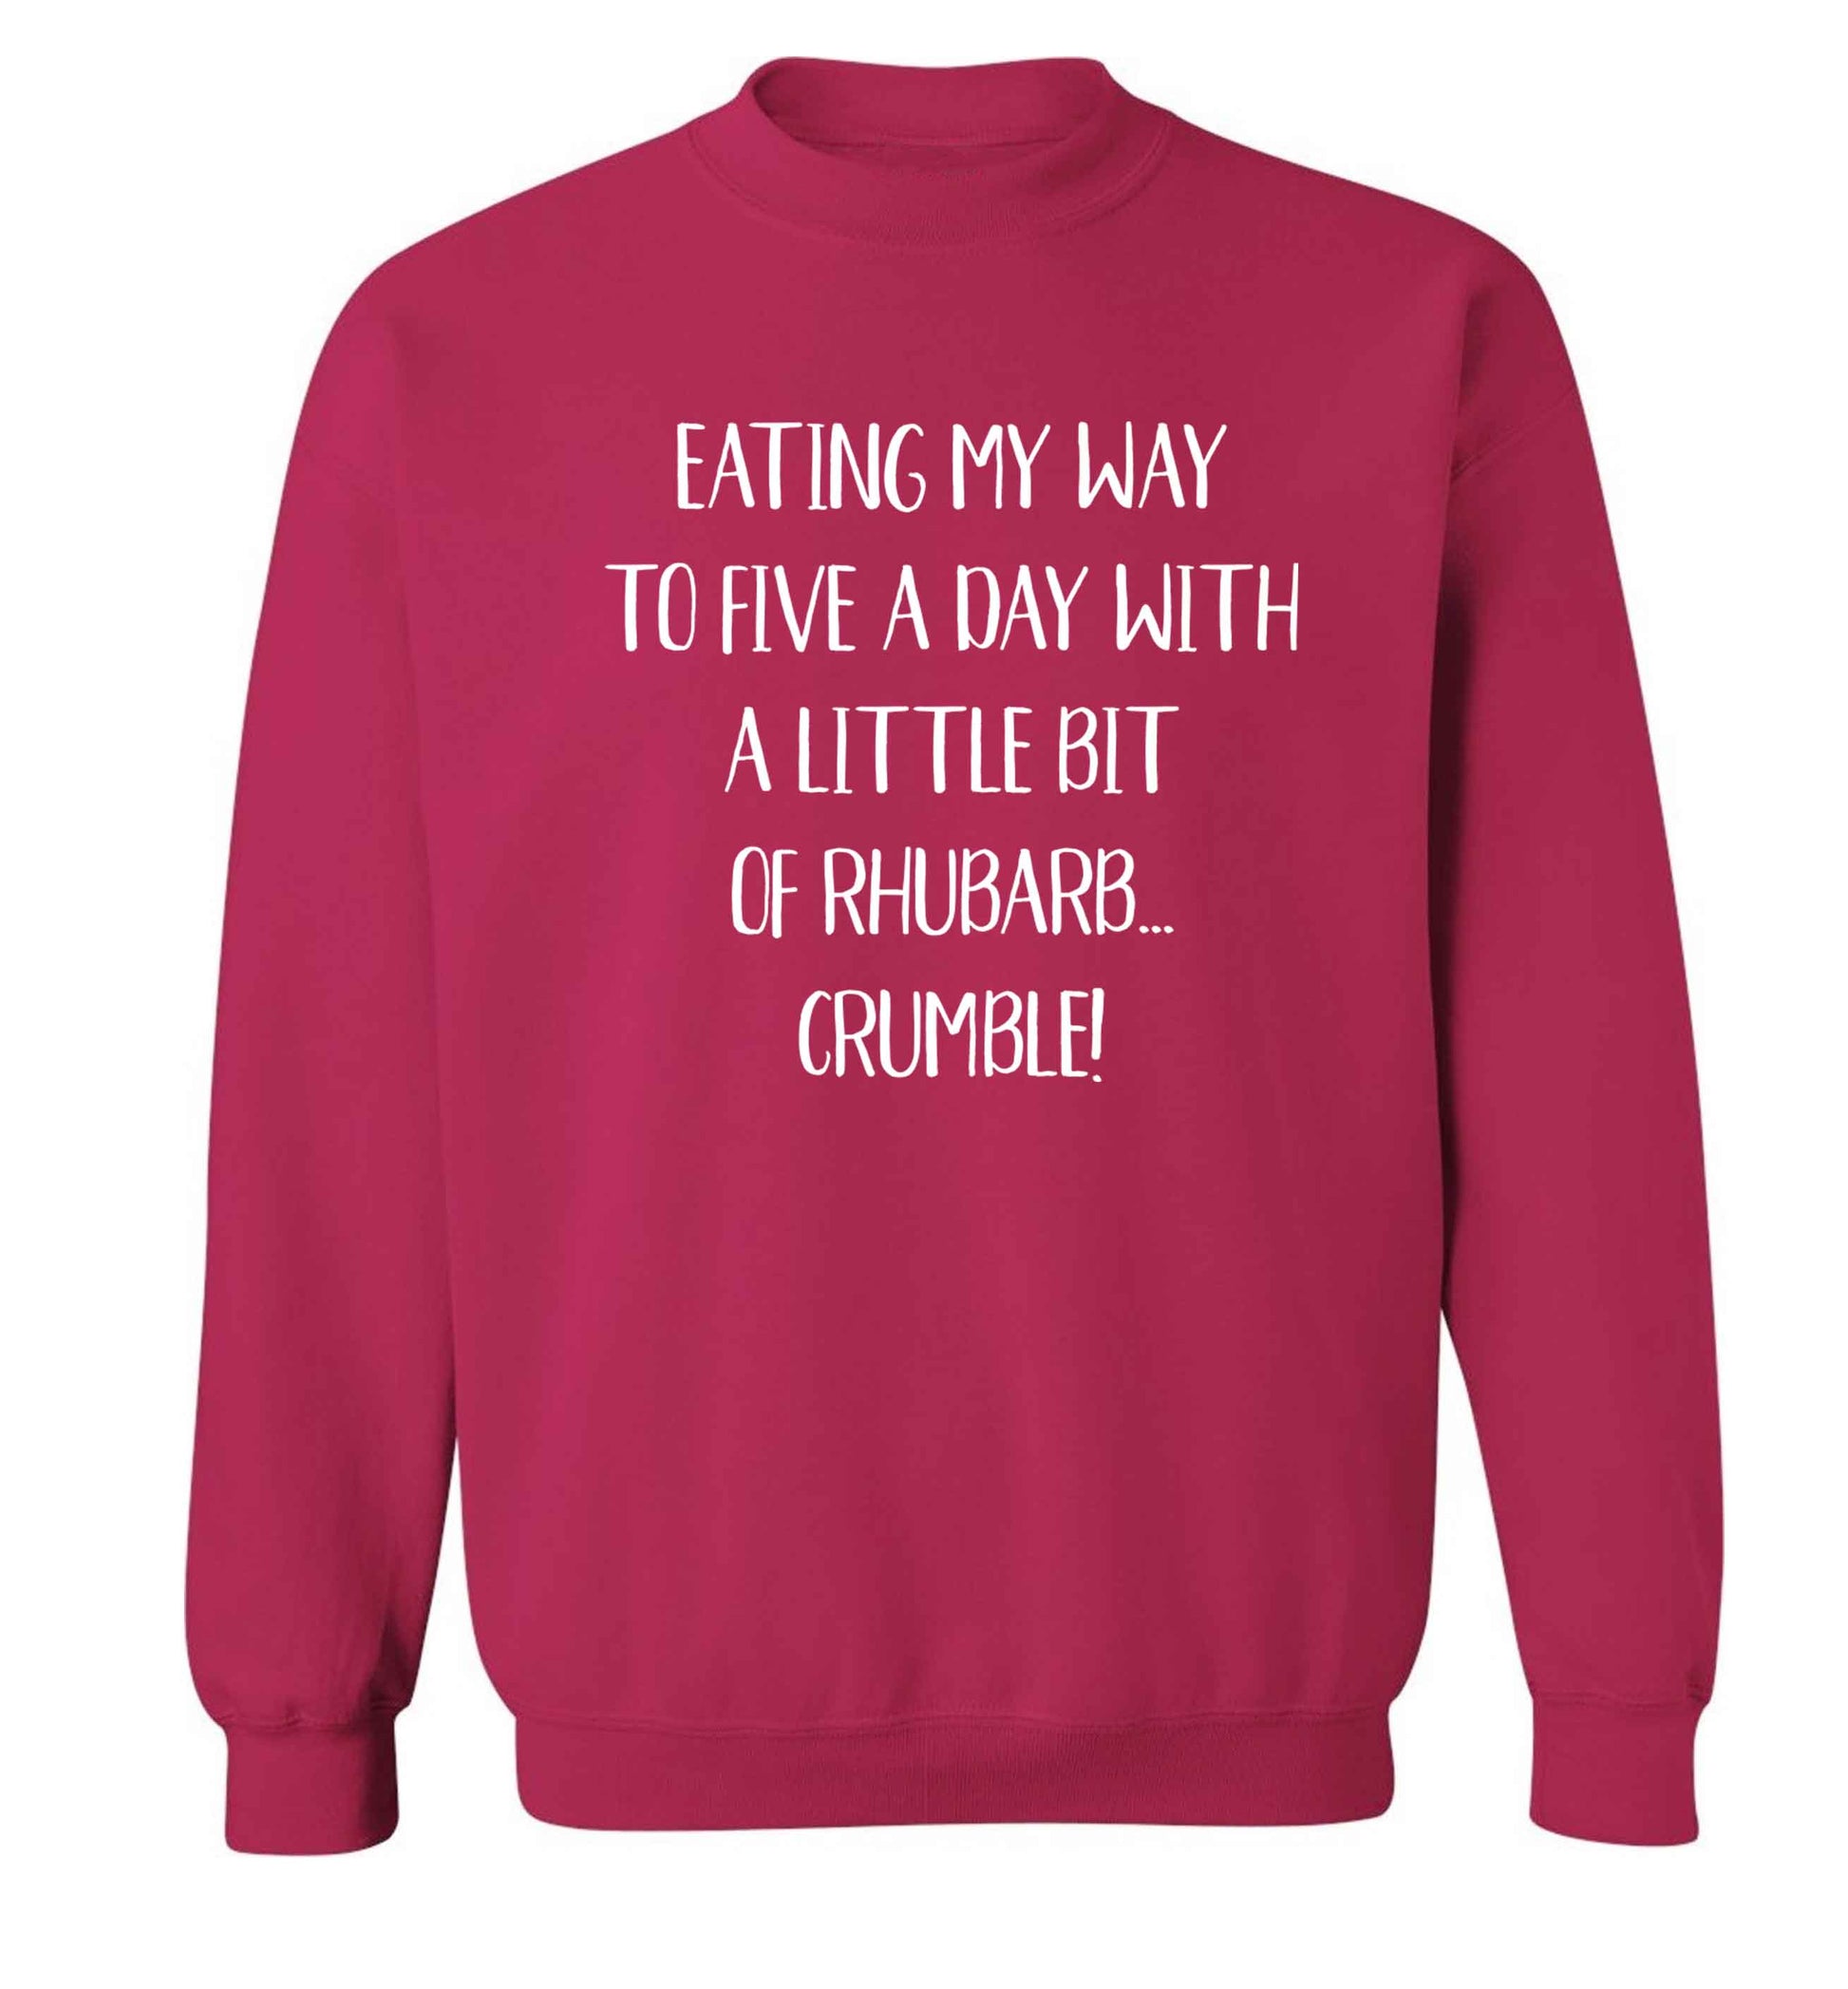 Eating my way to five a day with a little bit of rhubarb crumble Adult's unisex pink Sweater 2XL